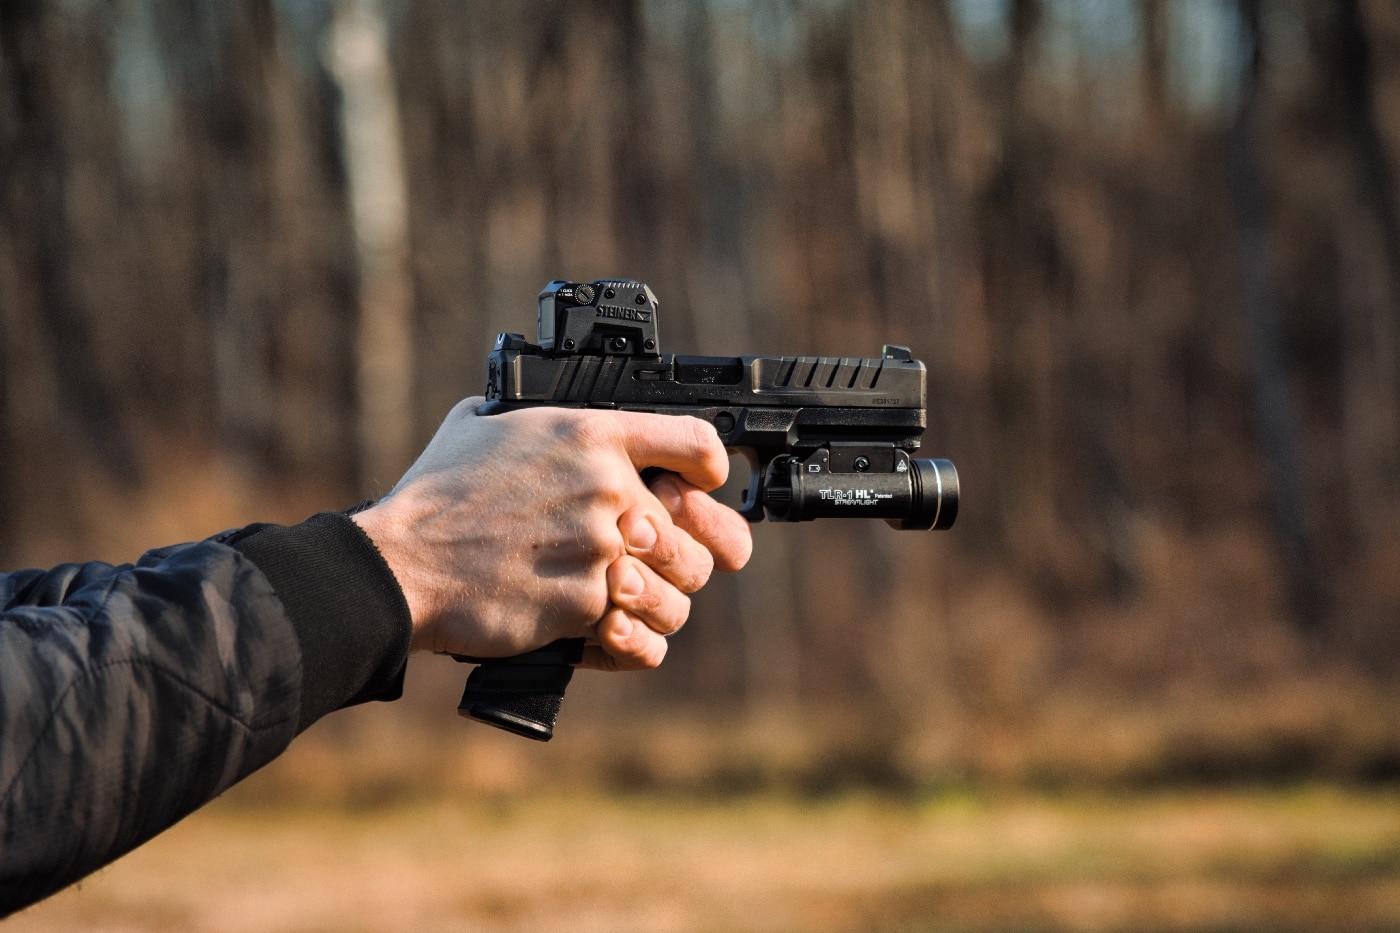 Shown is a photo of the author testing the Steiner MPS reflex sight mounted atop a pistol — in this case a Springfield Echelon. The MPS uses a mounting footprint similar to the Aimpoint ACRO footprint. That means the optice does need an adapter plate. However, it does not interfere with the rear sight.